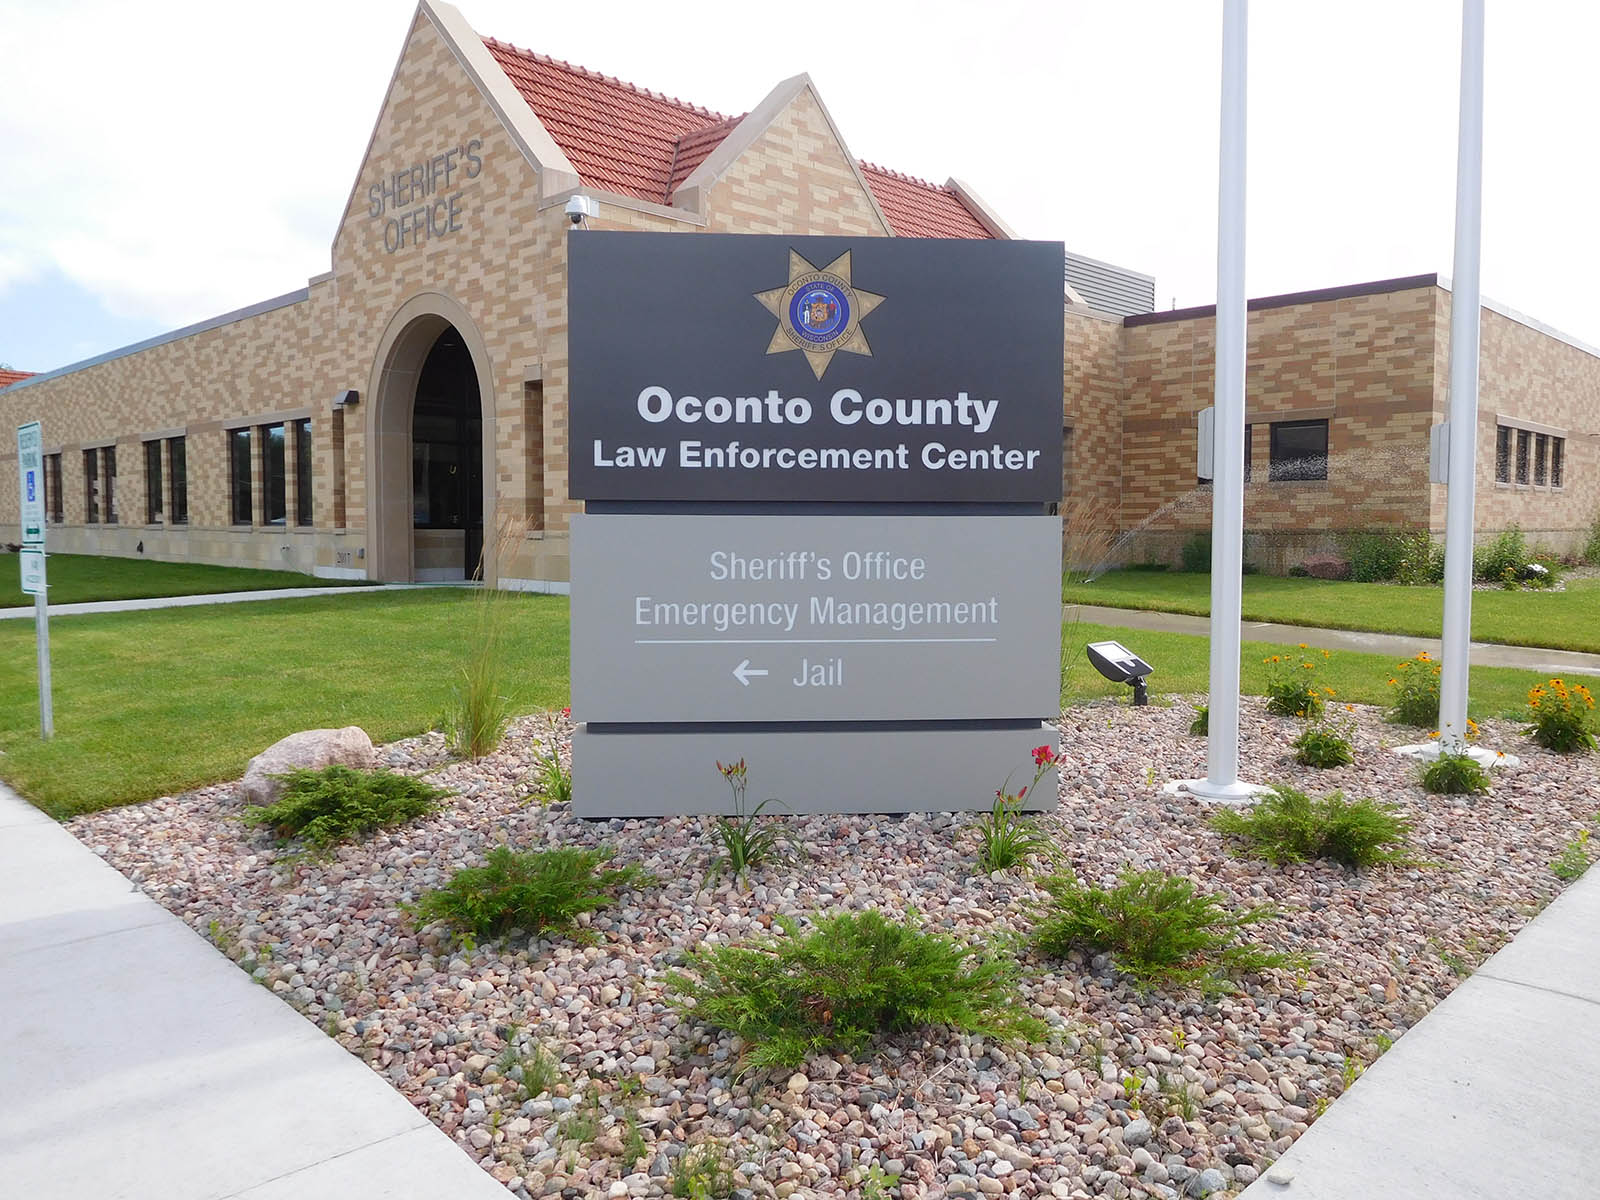 Signage and and main entrance at the Oconto County Law Enforcement Center in Oconto, WI